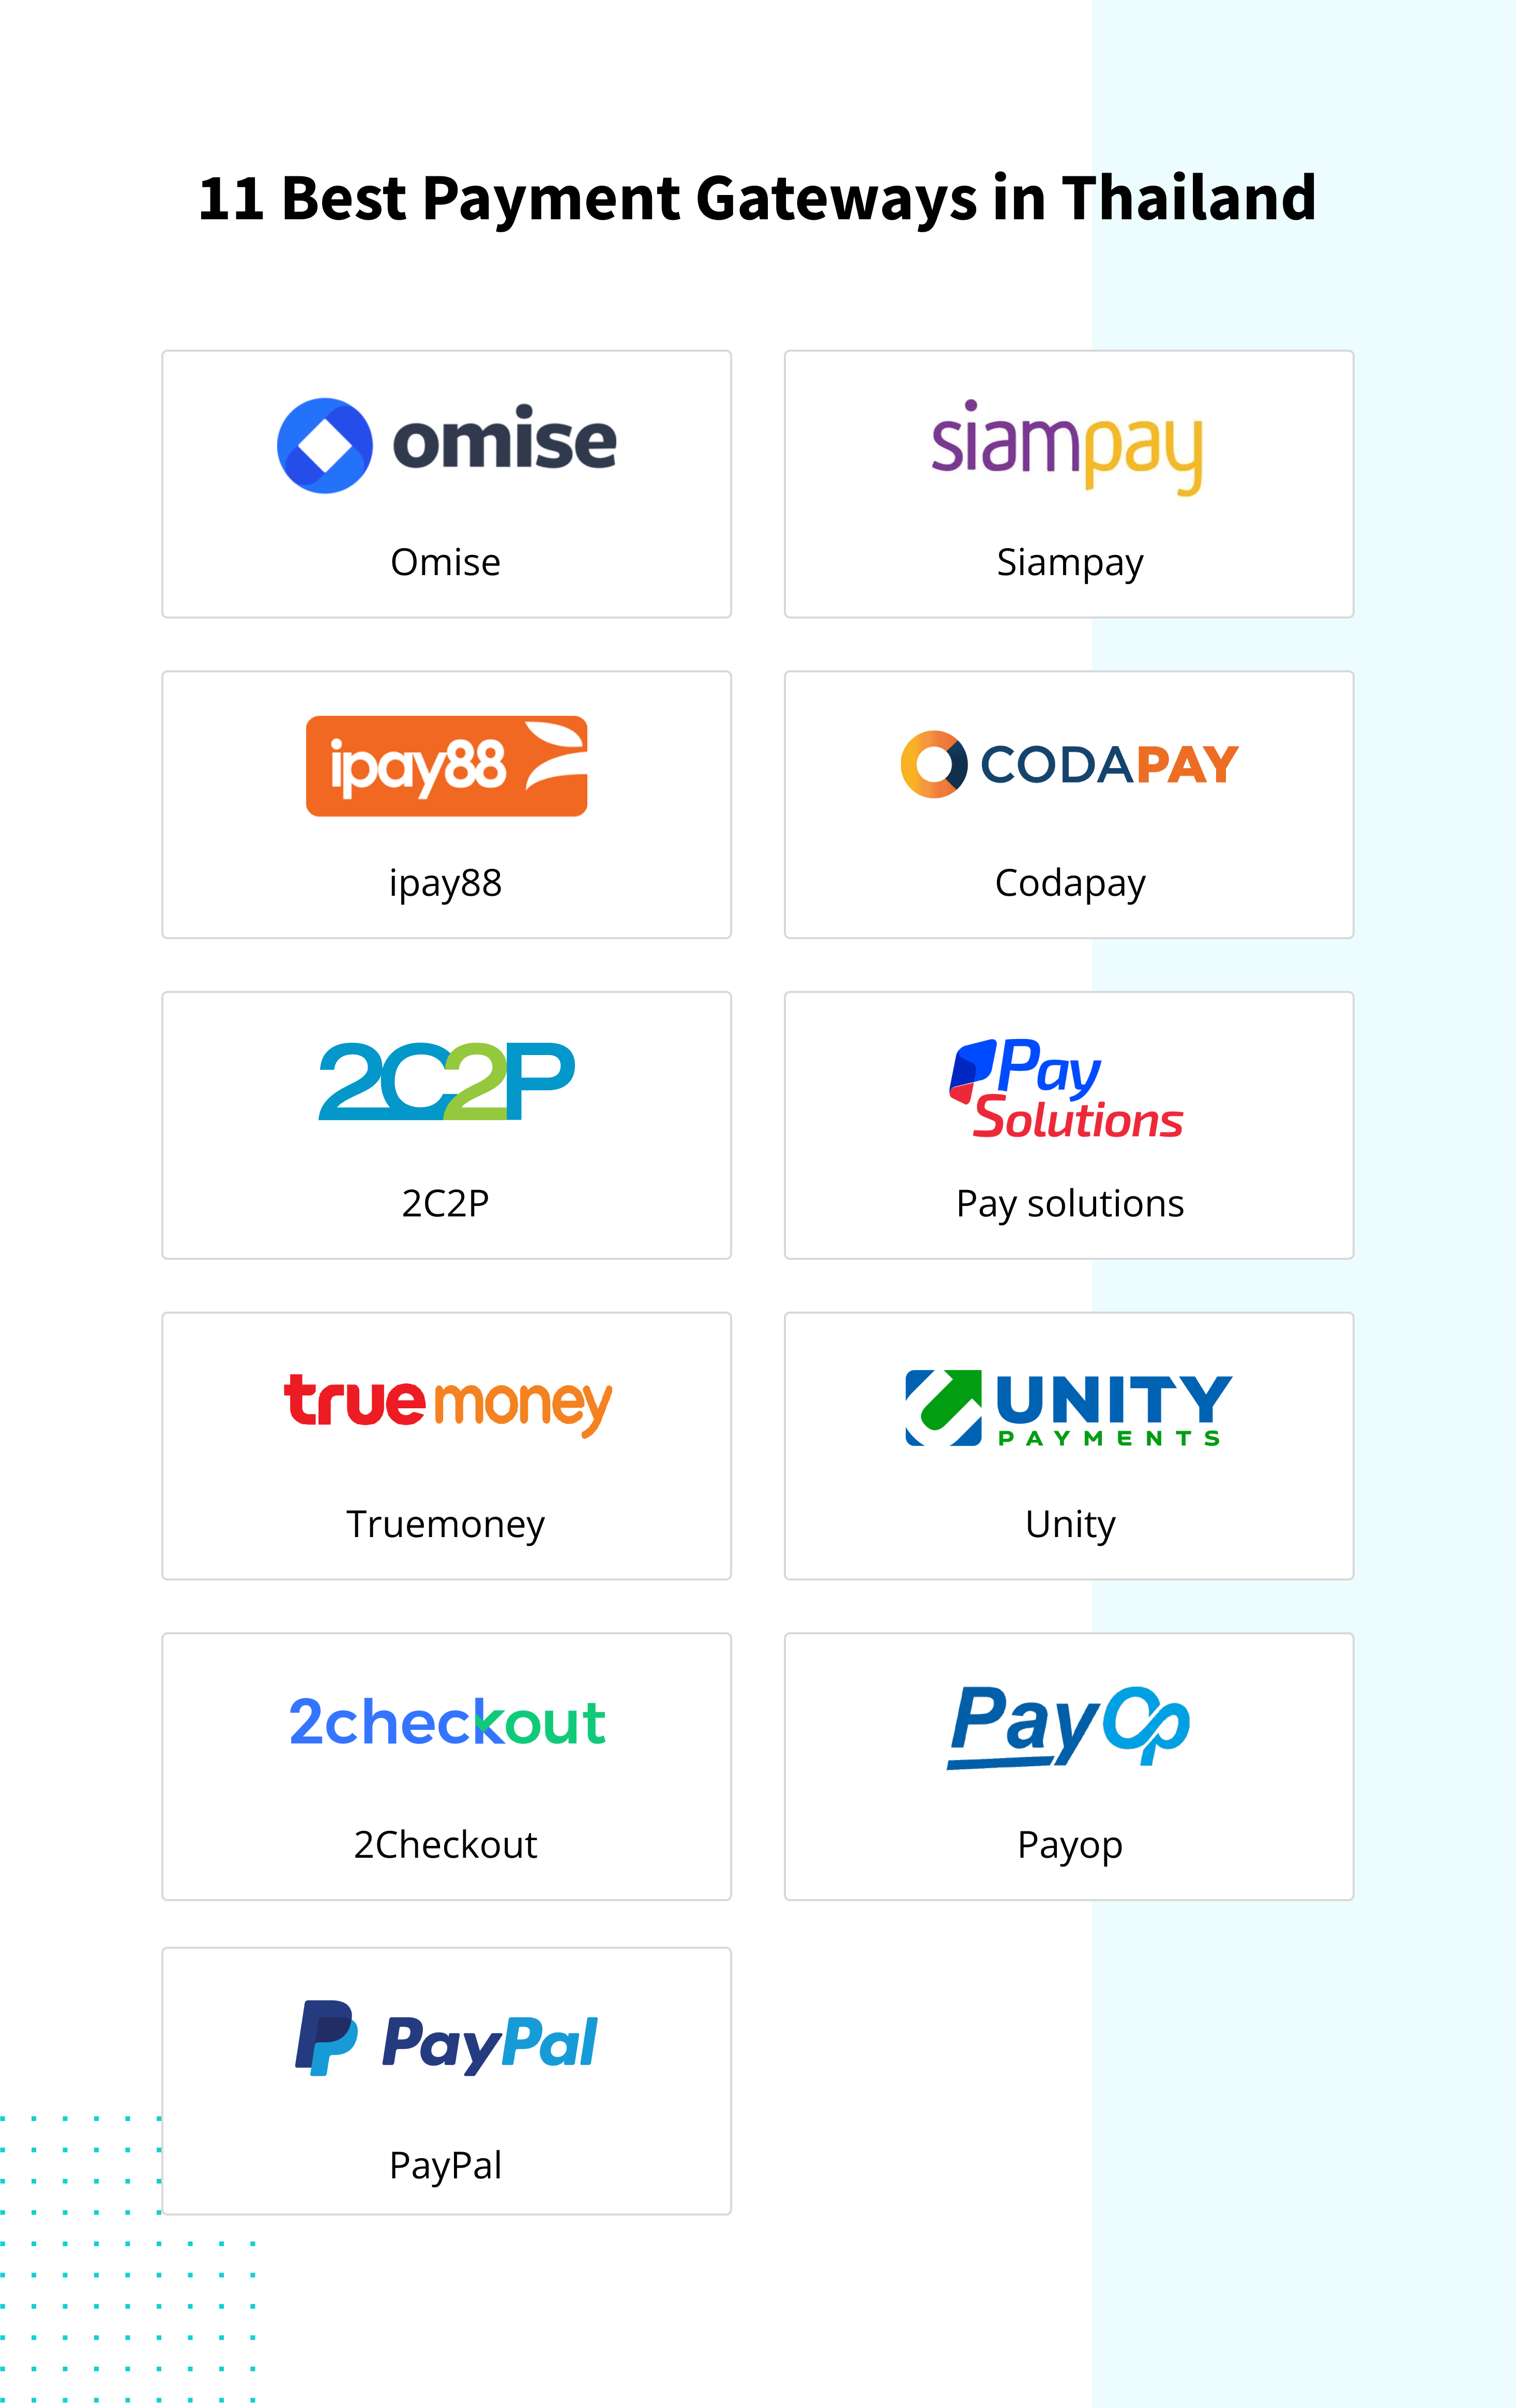 All%20About%20the%2011%20Best%20Payment%20Gateways%20in%20Thailand.png?width\u003d2932\u0026name\u003dAll%20About%20the%2011%20Best%20Payment%20Gateways%20in%20Thailand